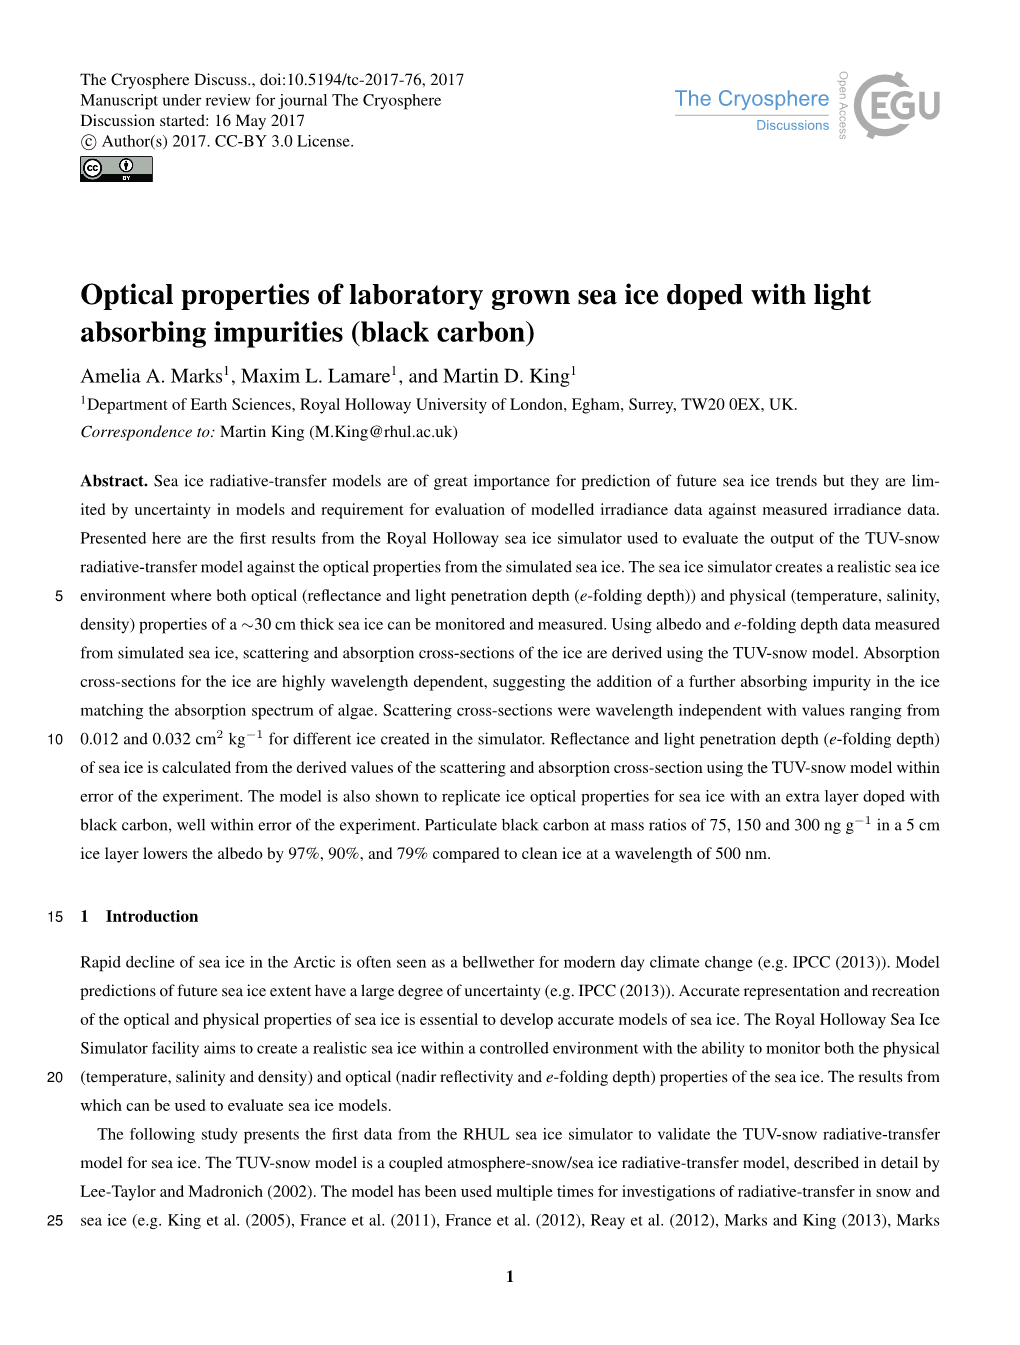 Optical Properties of Laboratory Grown Sea Ice Doped with Light Absorbing Impurities (Black Carbon) Amelia A